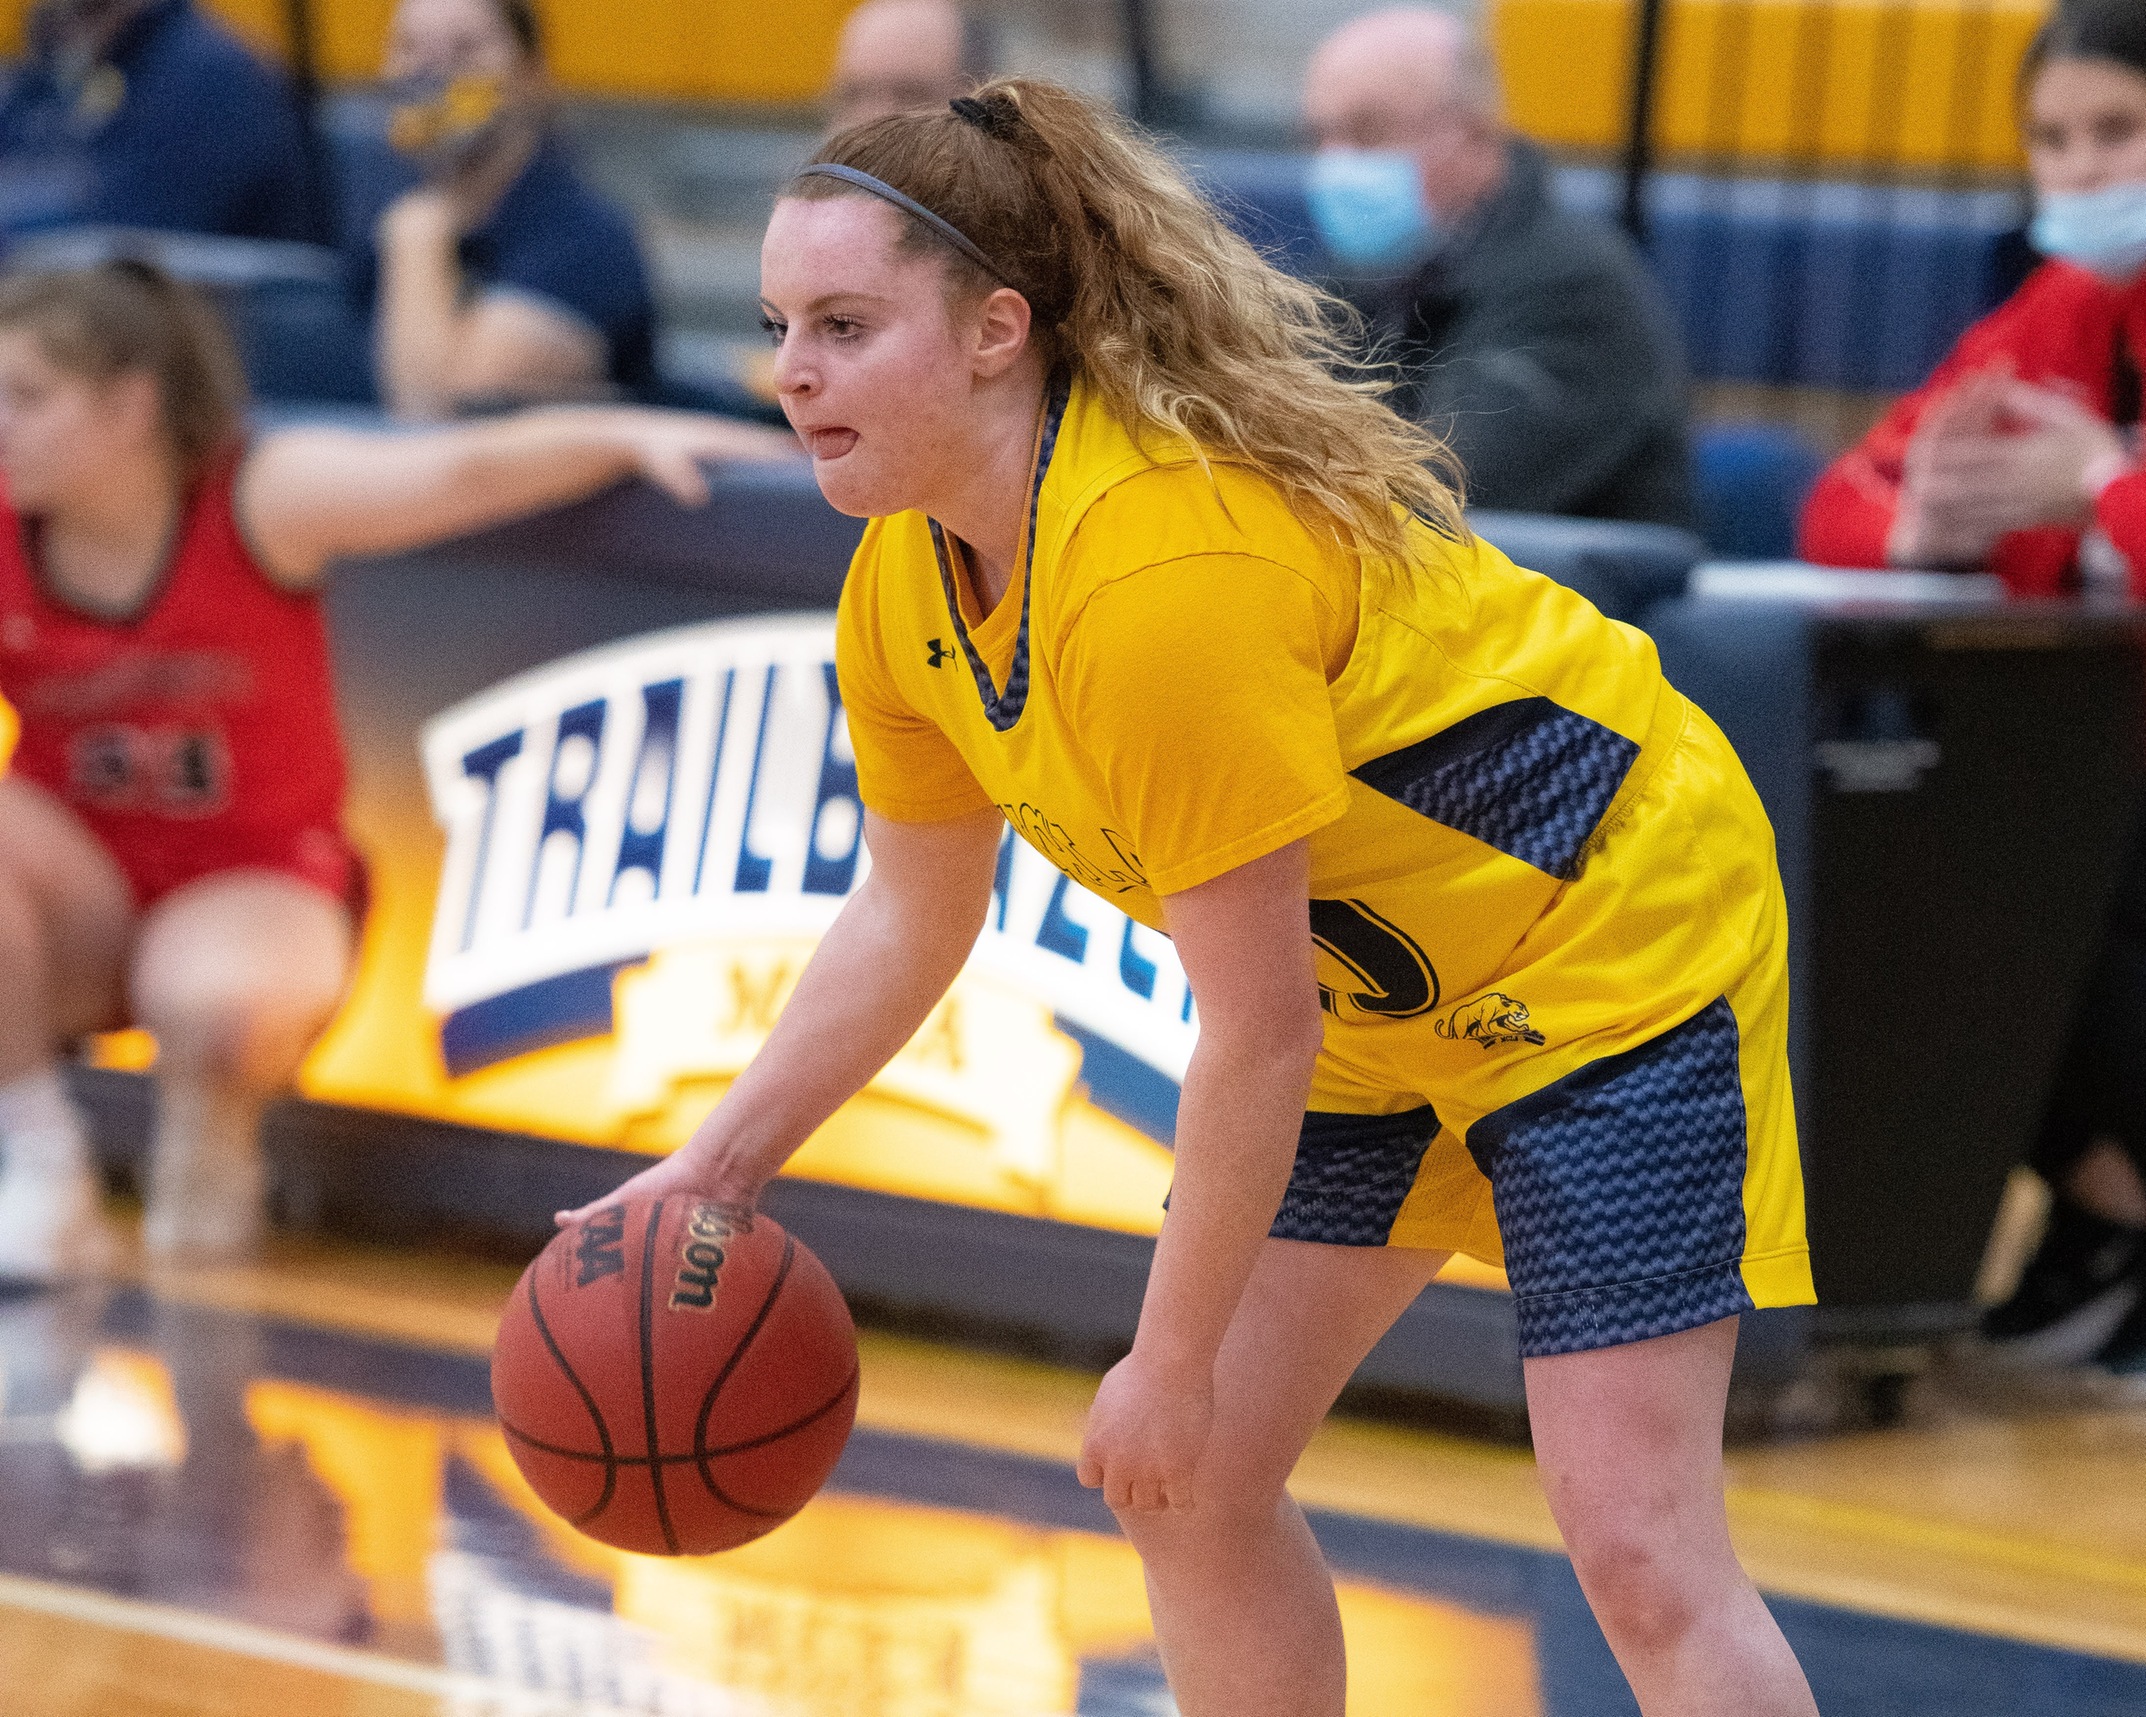 Women's Basketball has season come to a close with loss to Bears in MASCAC Quarterfinals